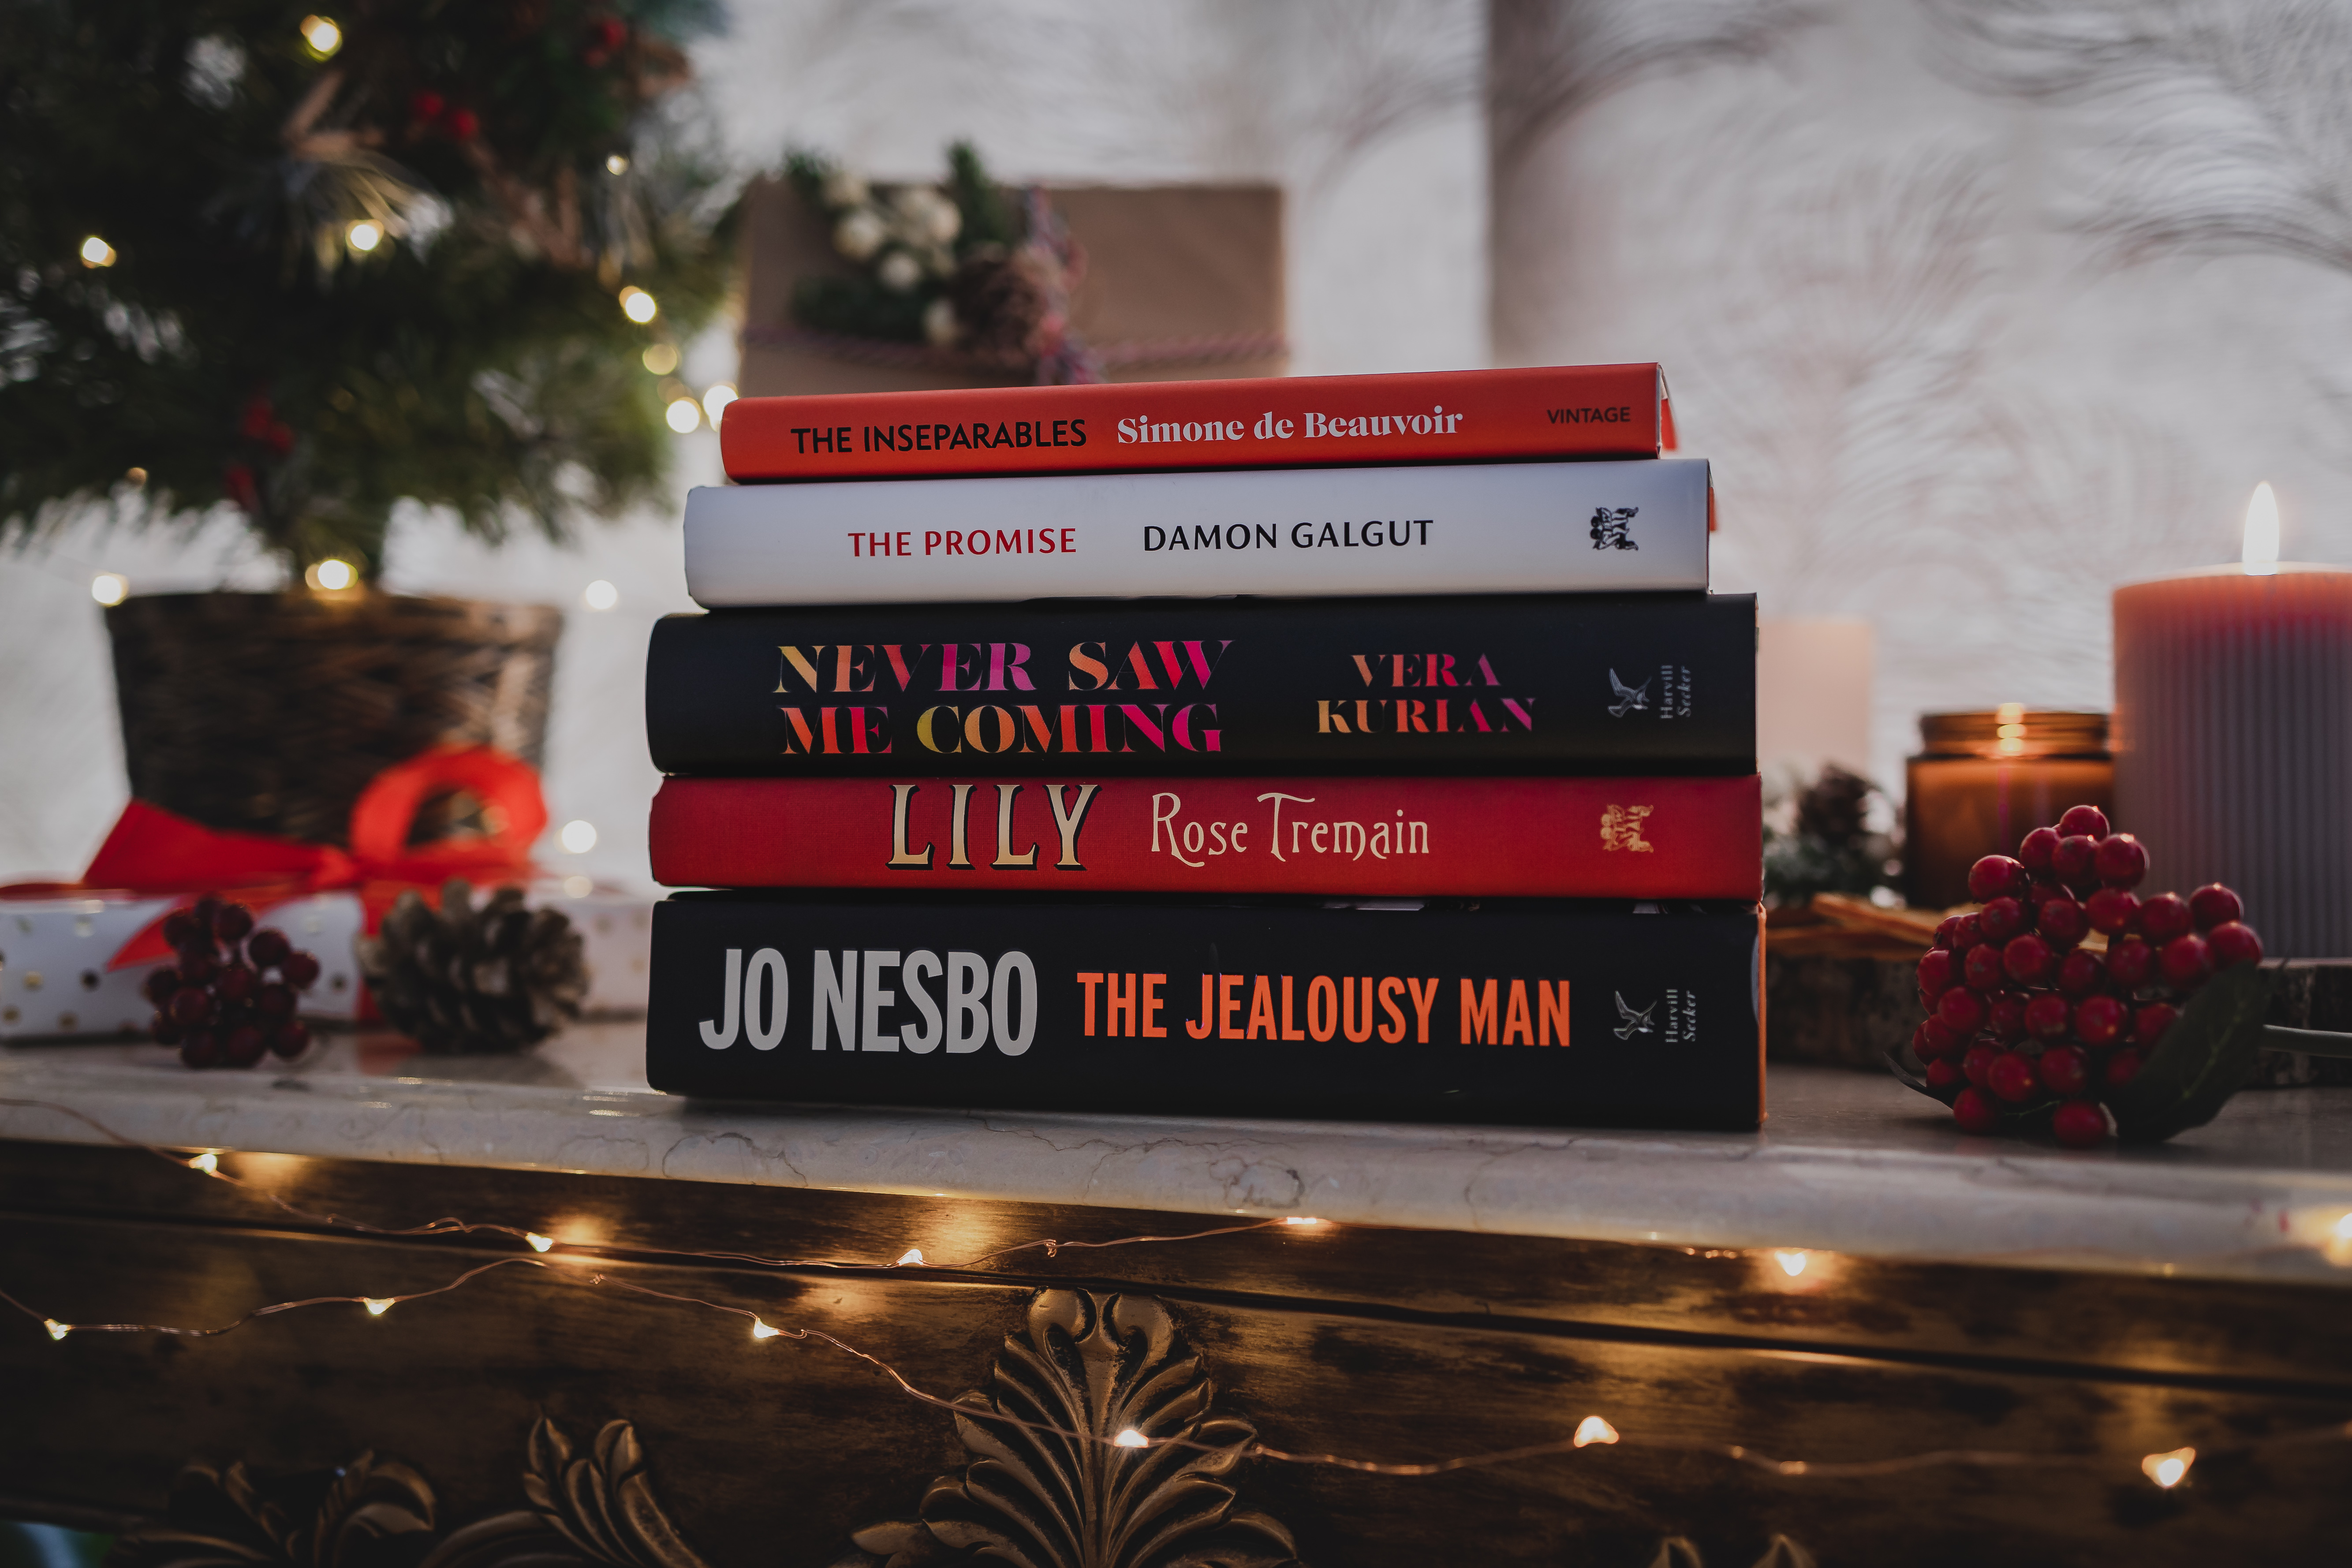 Pile of books on a shelf with Christmas decorations in the background.